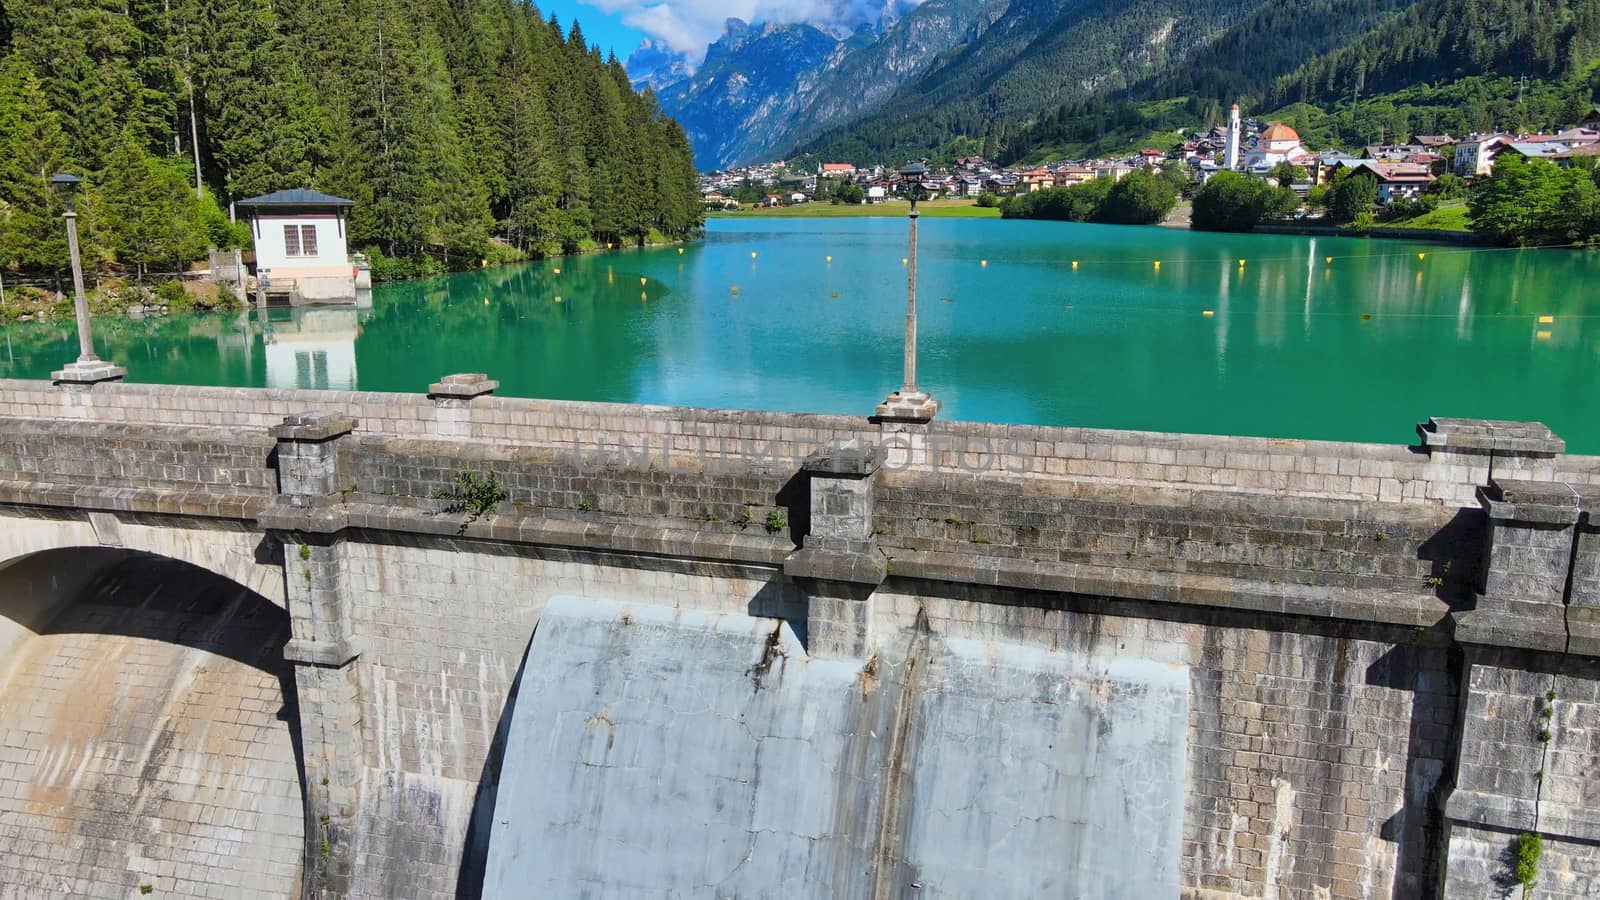 Alpin lake and dam in summertime, view from drone, Auronzo, italian dolomites.